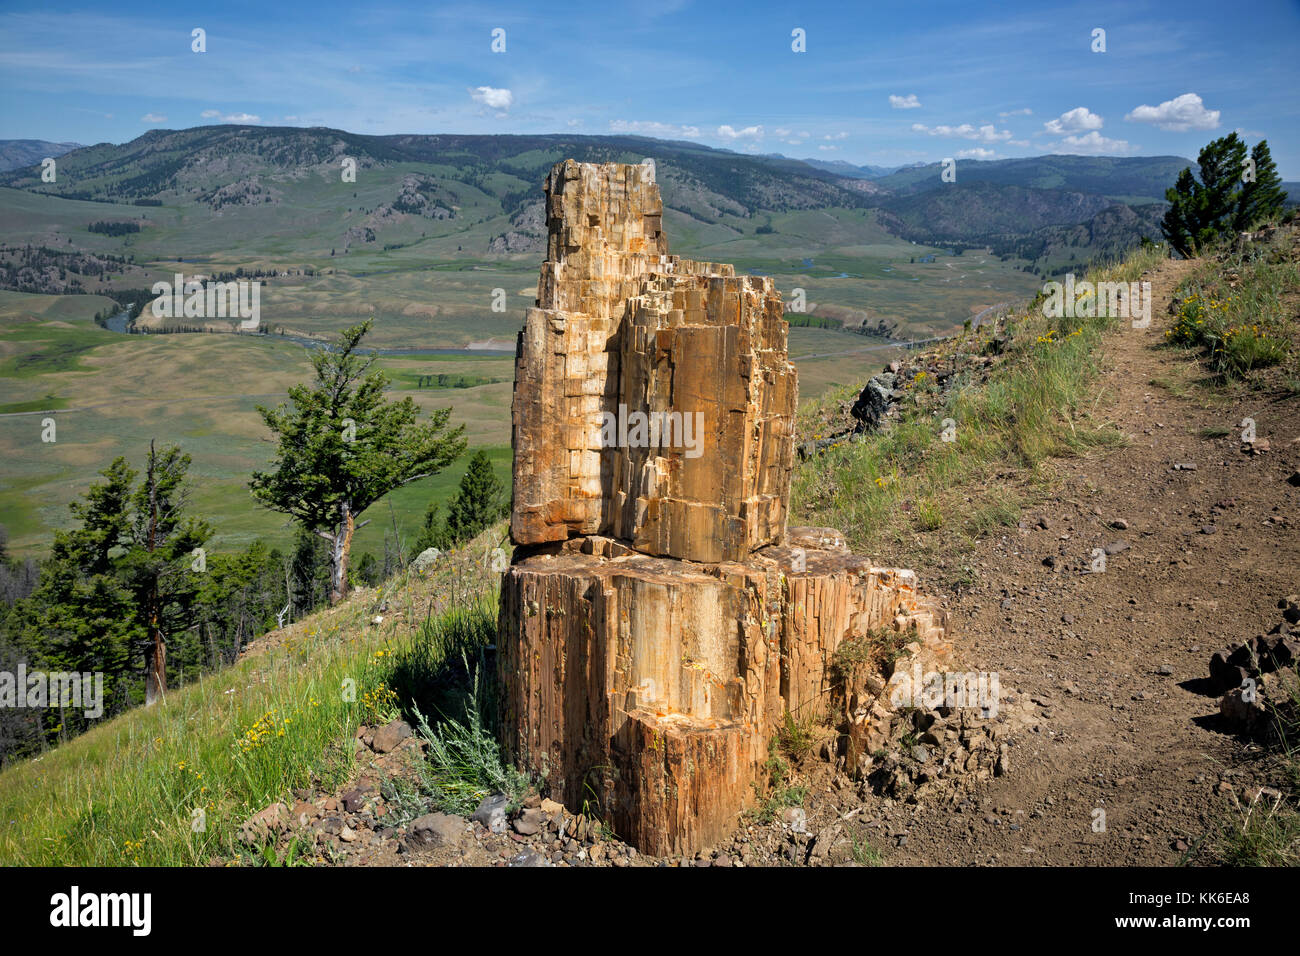 WY02686-00...WYOMING - A section of a petrified tree viewed on the Petrified Trees trail while over looking the Lamar Valley in Yellowstone National P Stock Photo